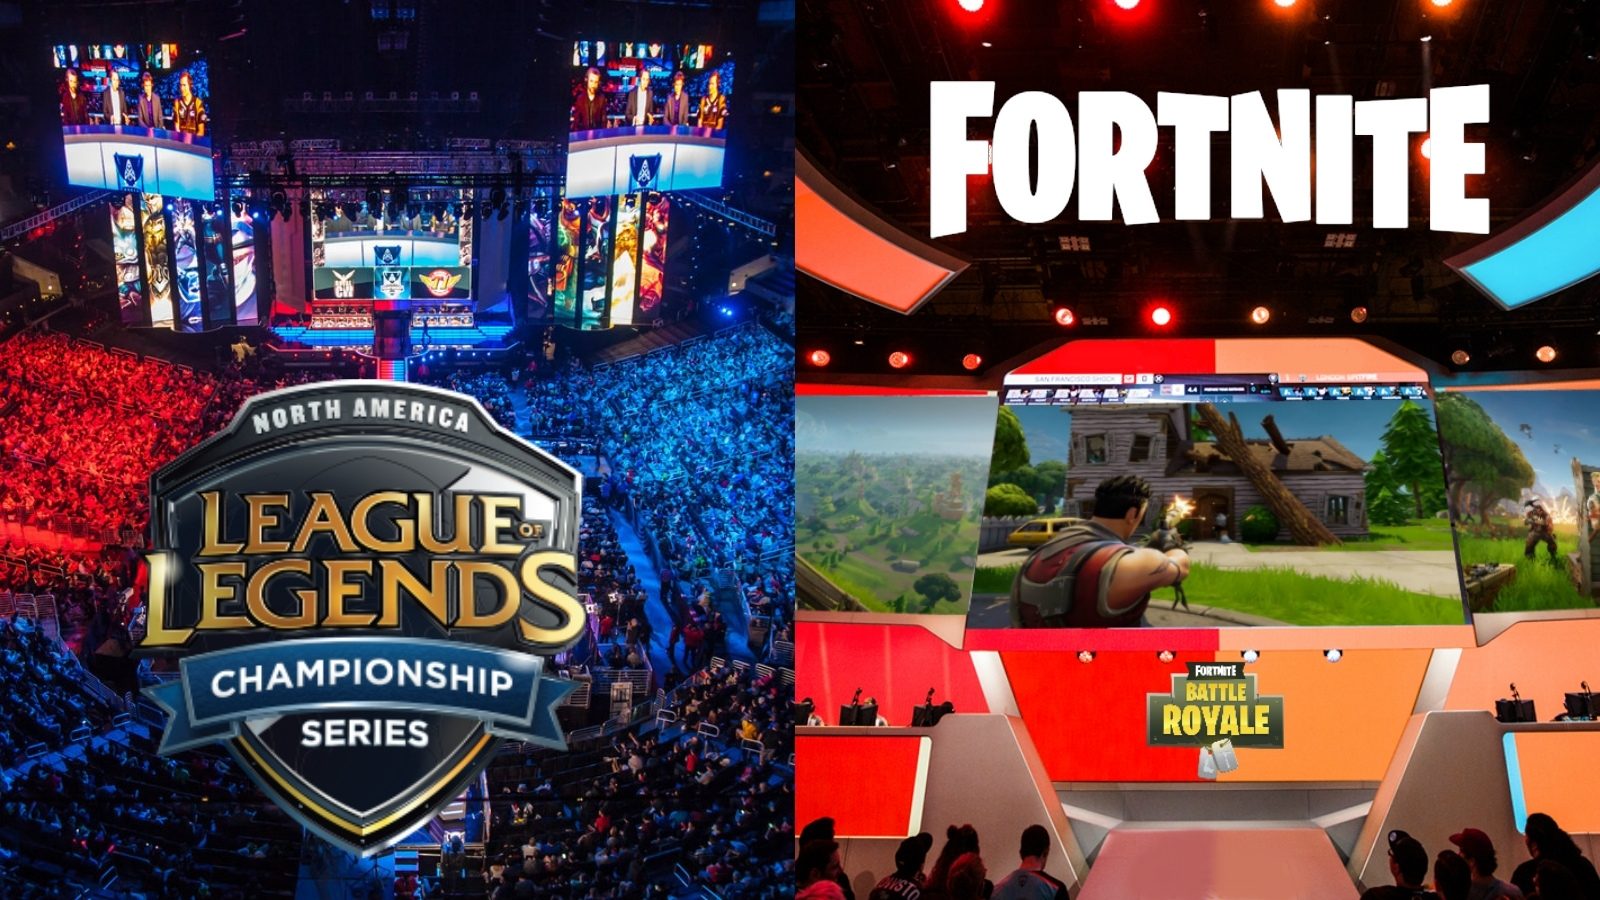 Head of Esports at Riot Games Says Fortnite Has A Long Way To Go To Become an Esport